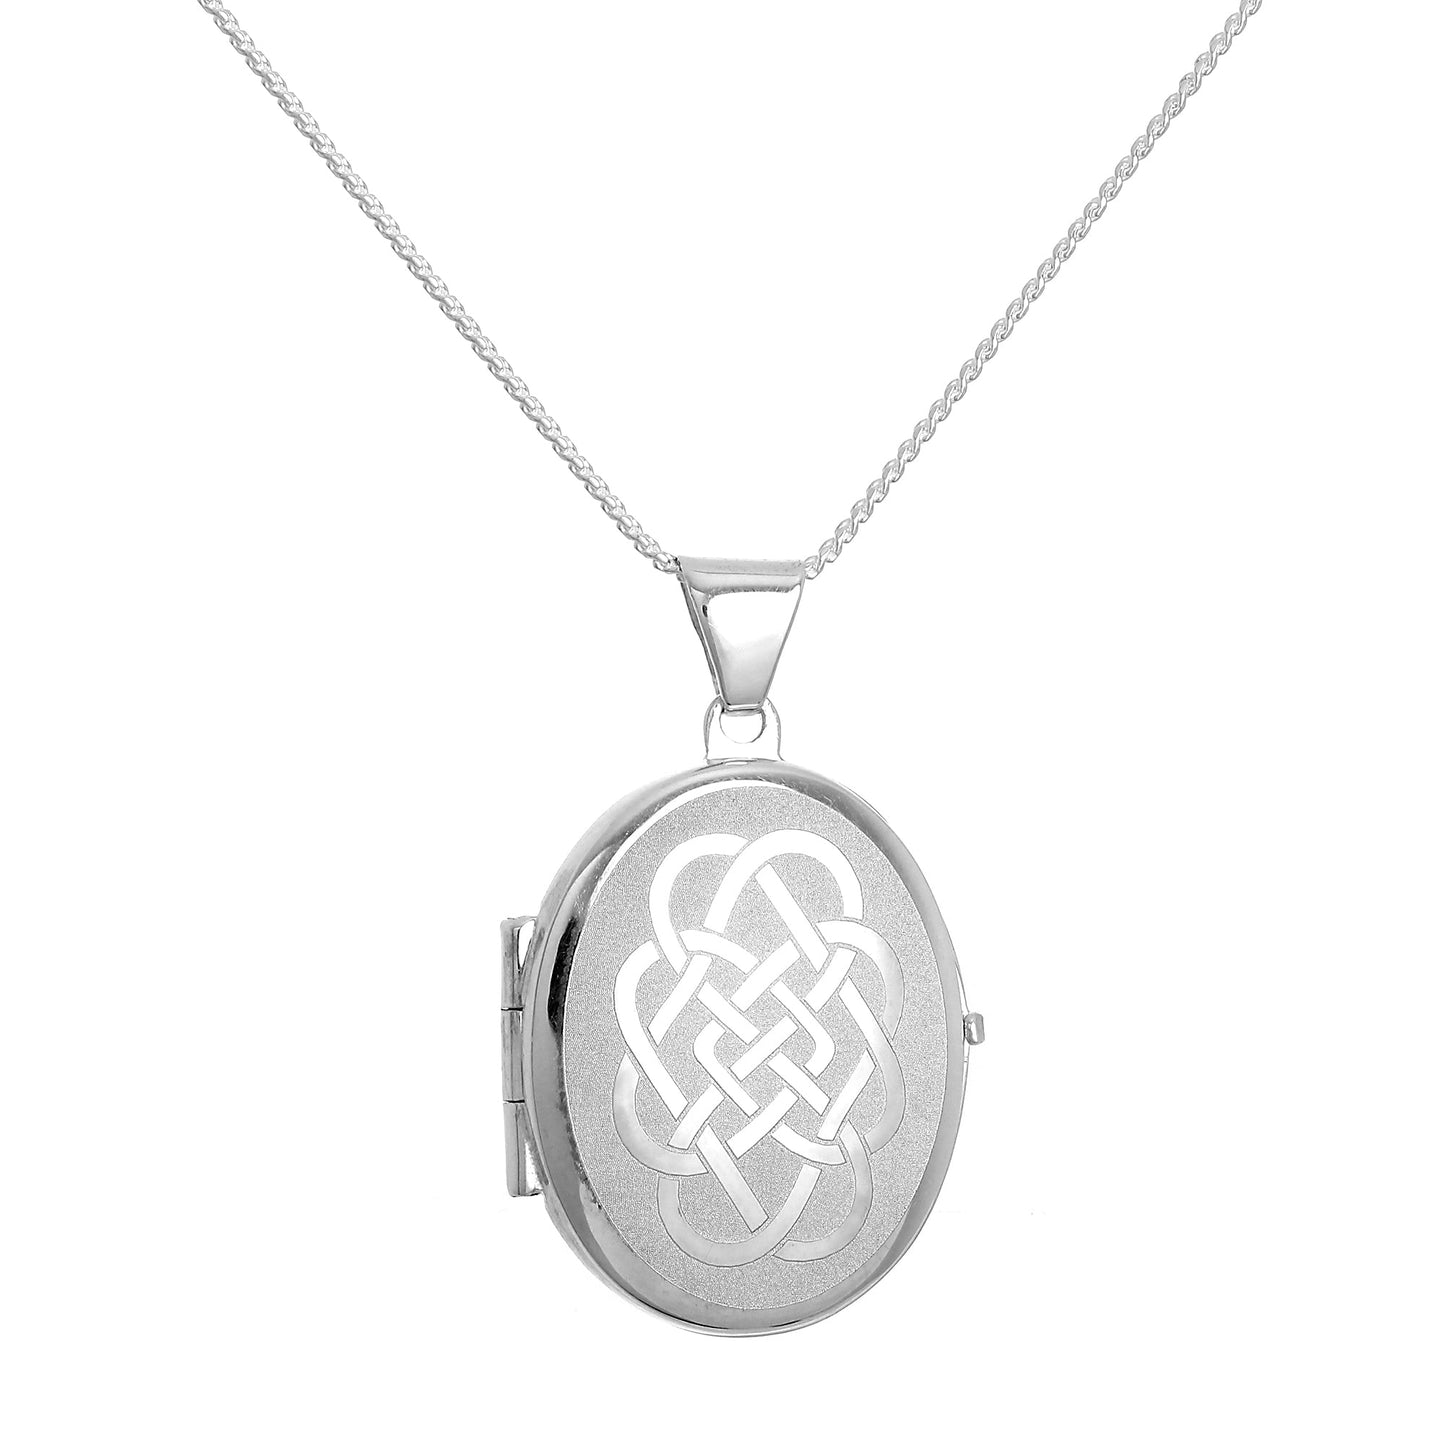 Matt Sterling Silver Oval Locket with Celtic Knot Design on Chain